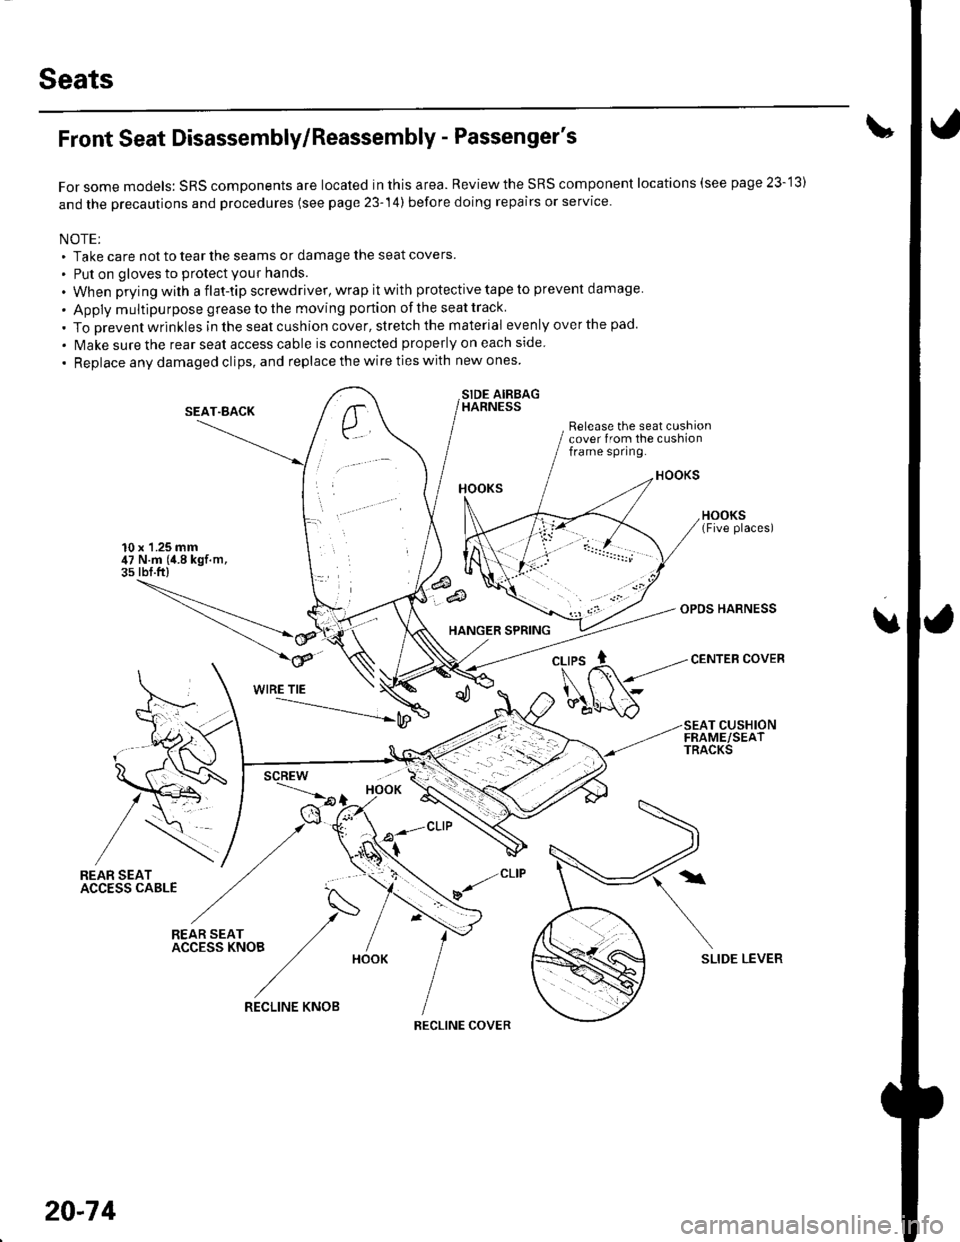 HONDA CIVIC 2003 7.G Workshop Manual Seats
Front Seat Disassembly/Reassembly - Passengers
For some models: SRS components are located in this area. Reviewthe SRS component locations (see page 23-13)
and the precautions and procedures (